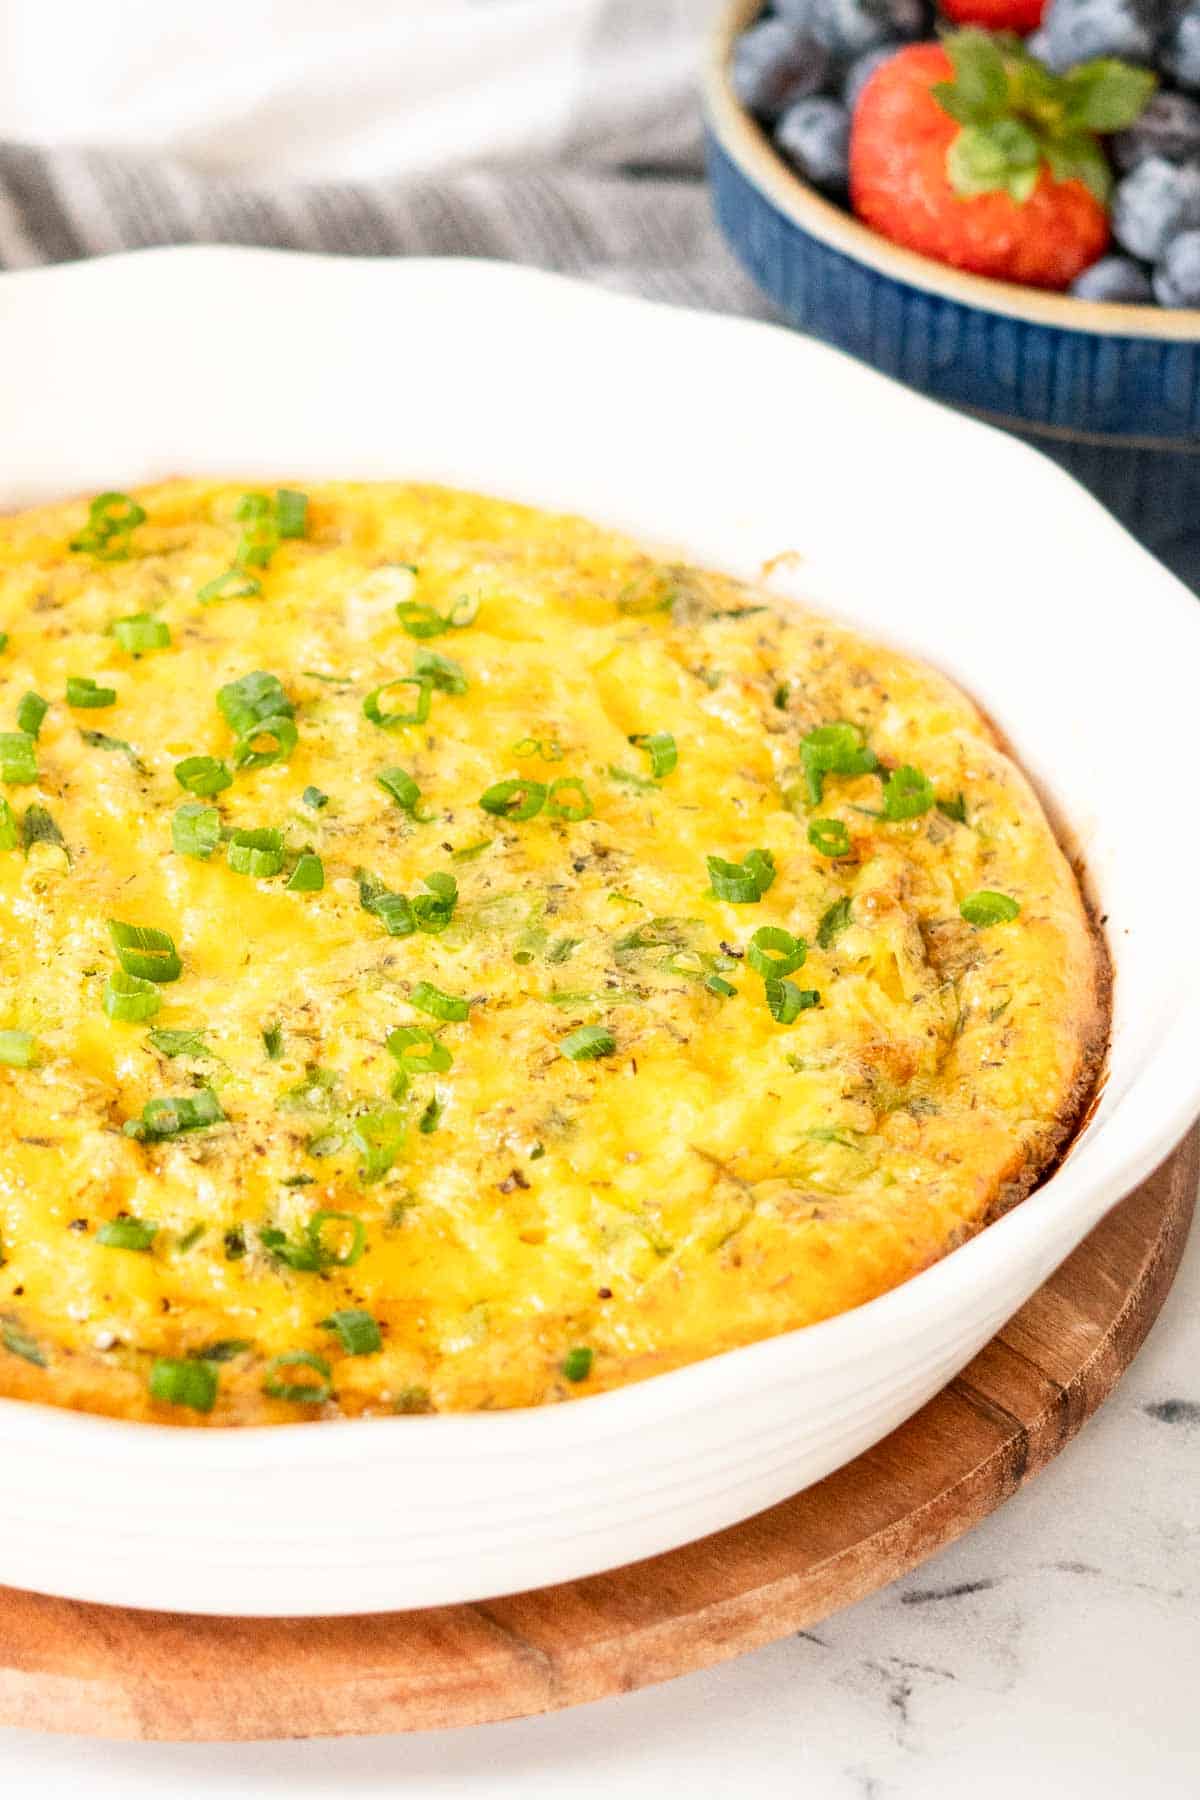 Crustless quiche in a white pie plate and topped with green onions.